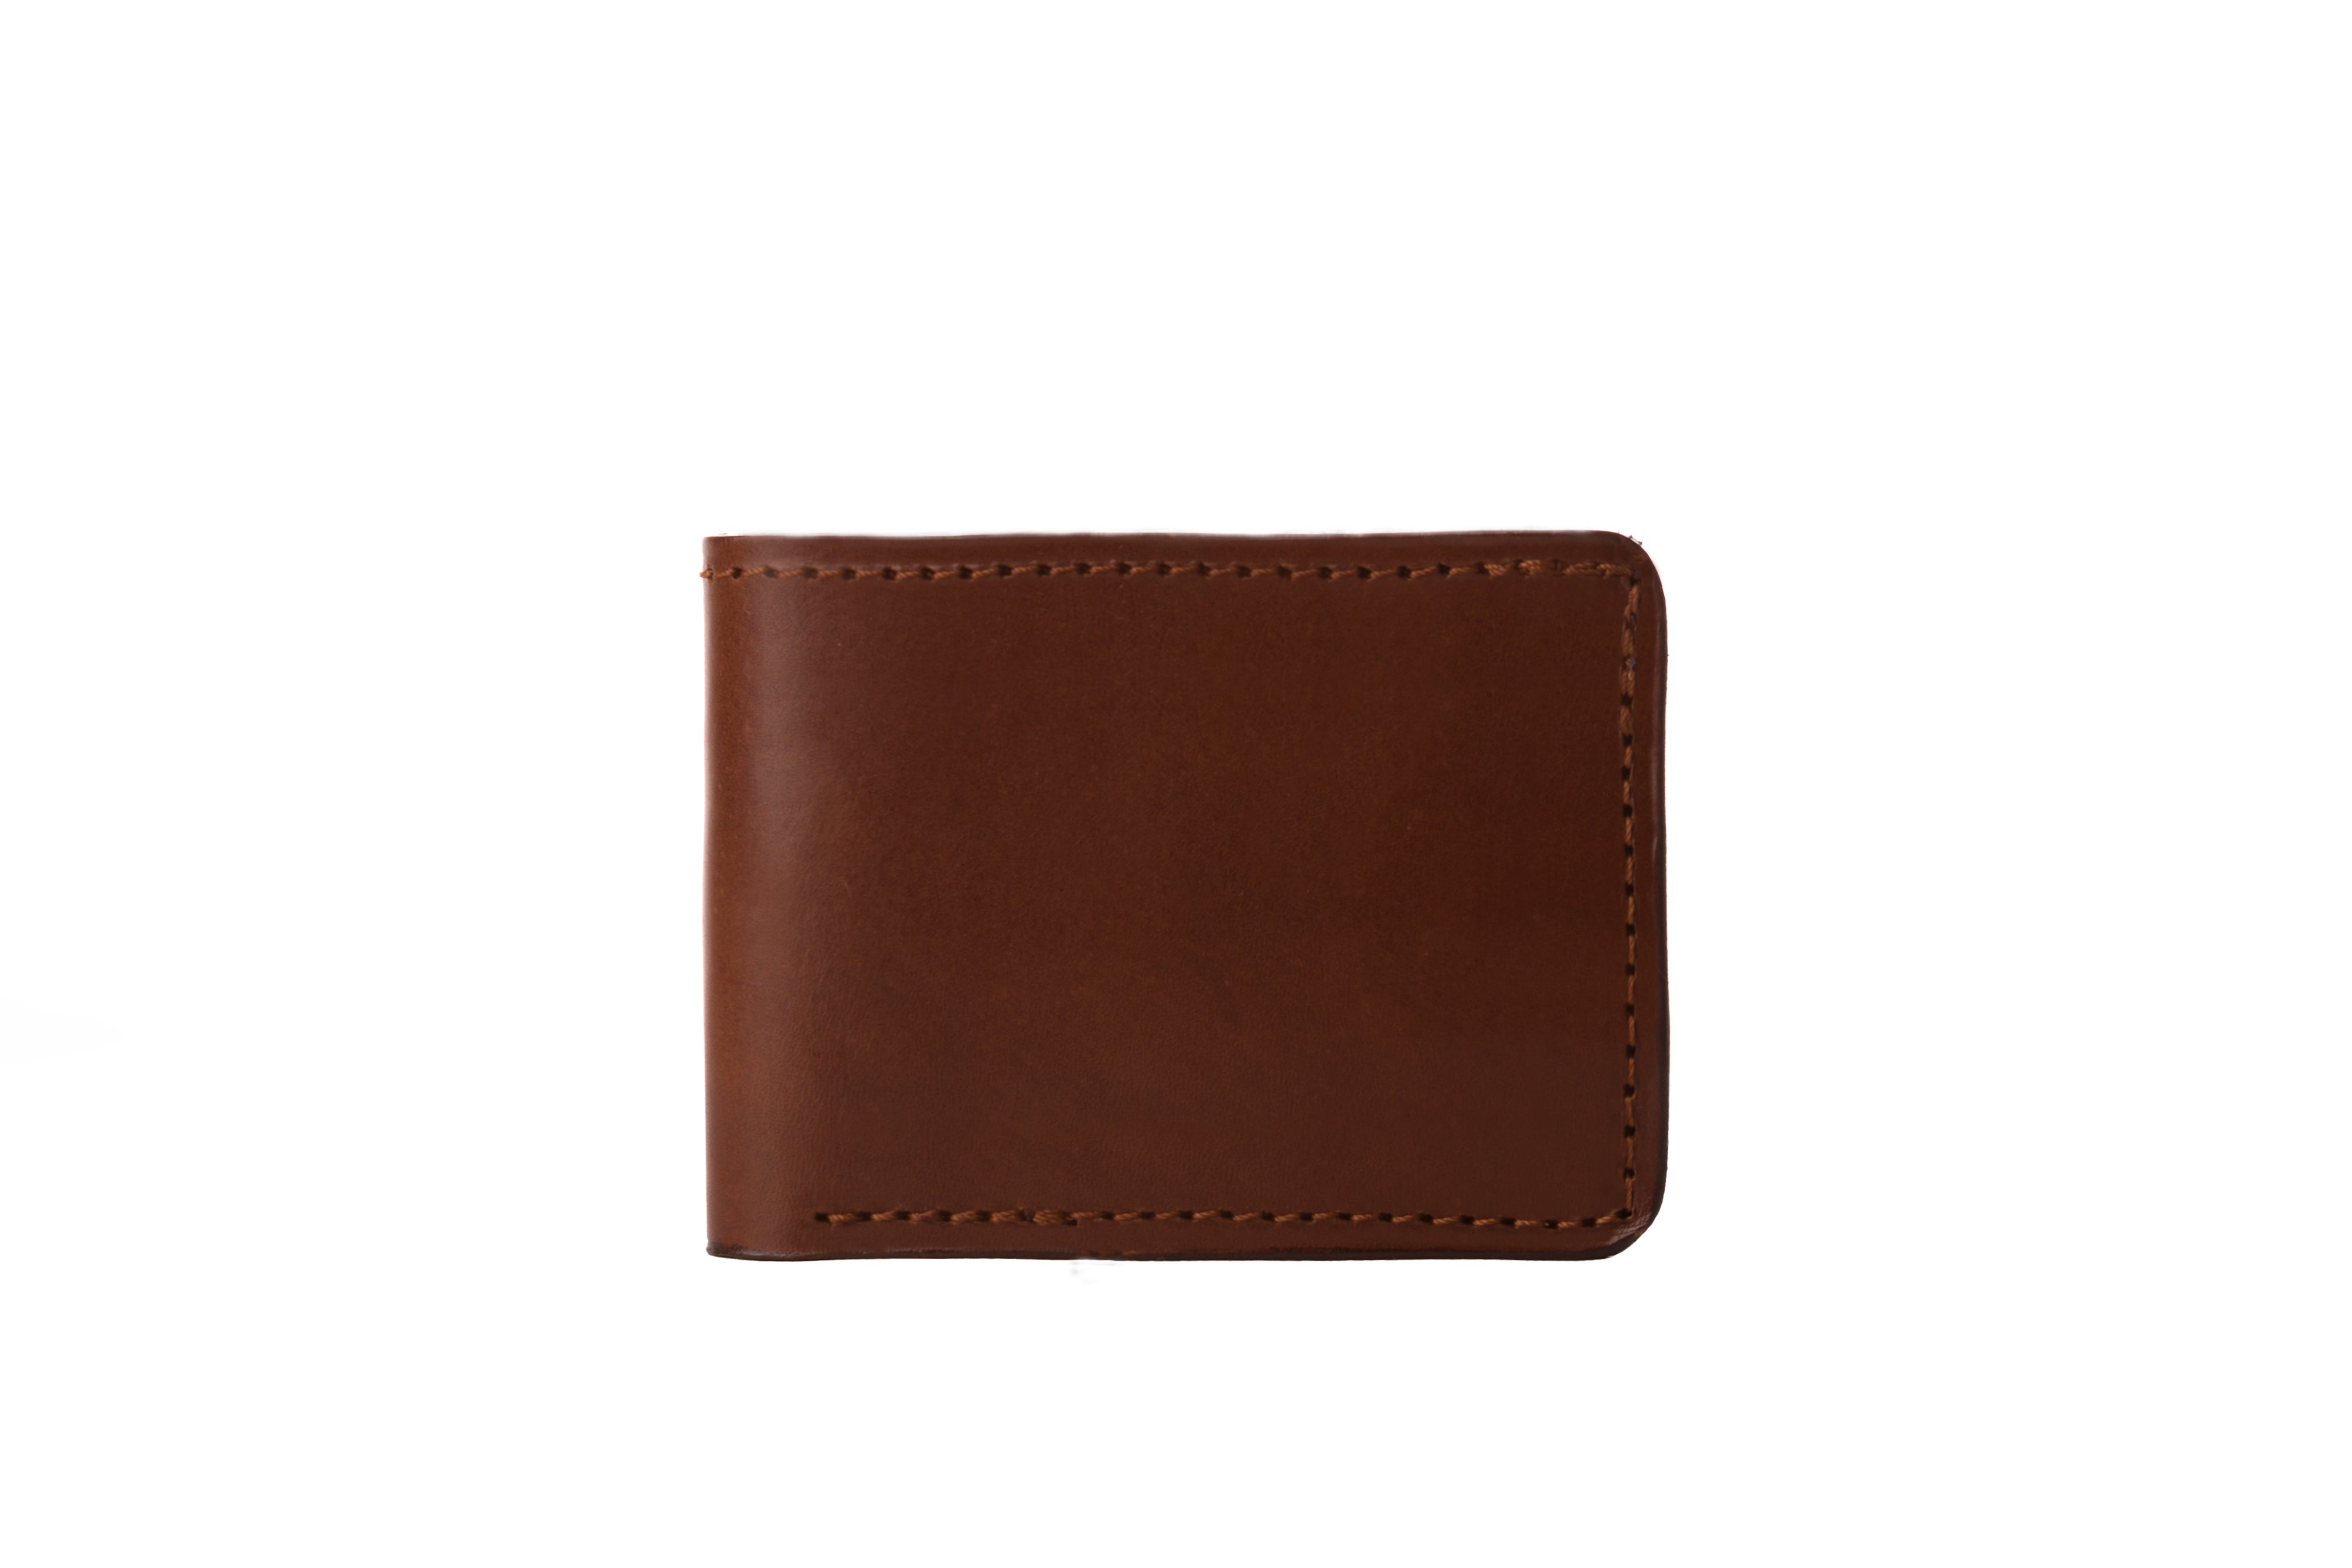 Leather Wallet The Dust Company su Artisia Store